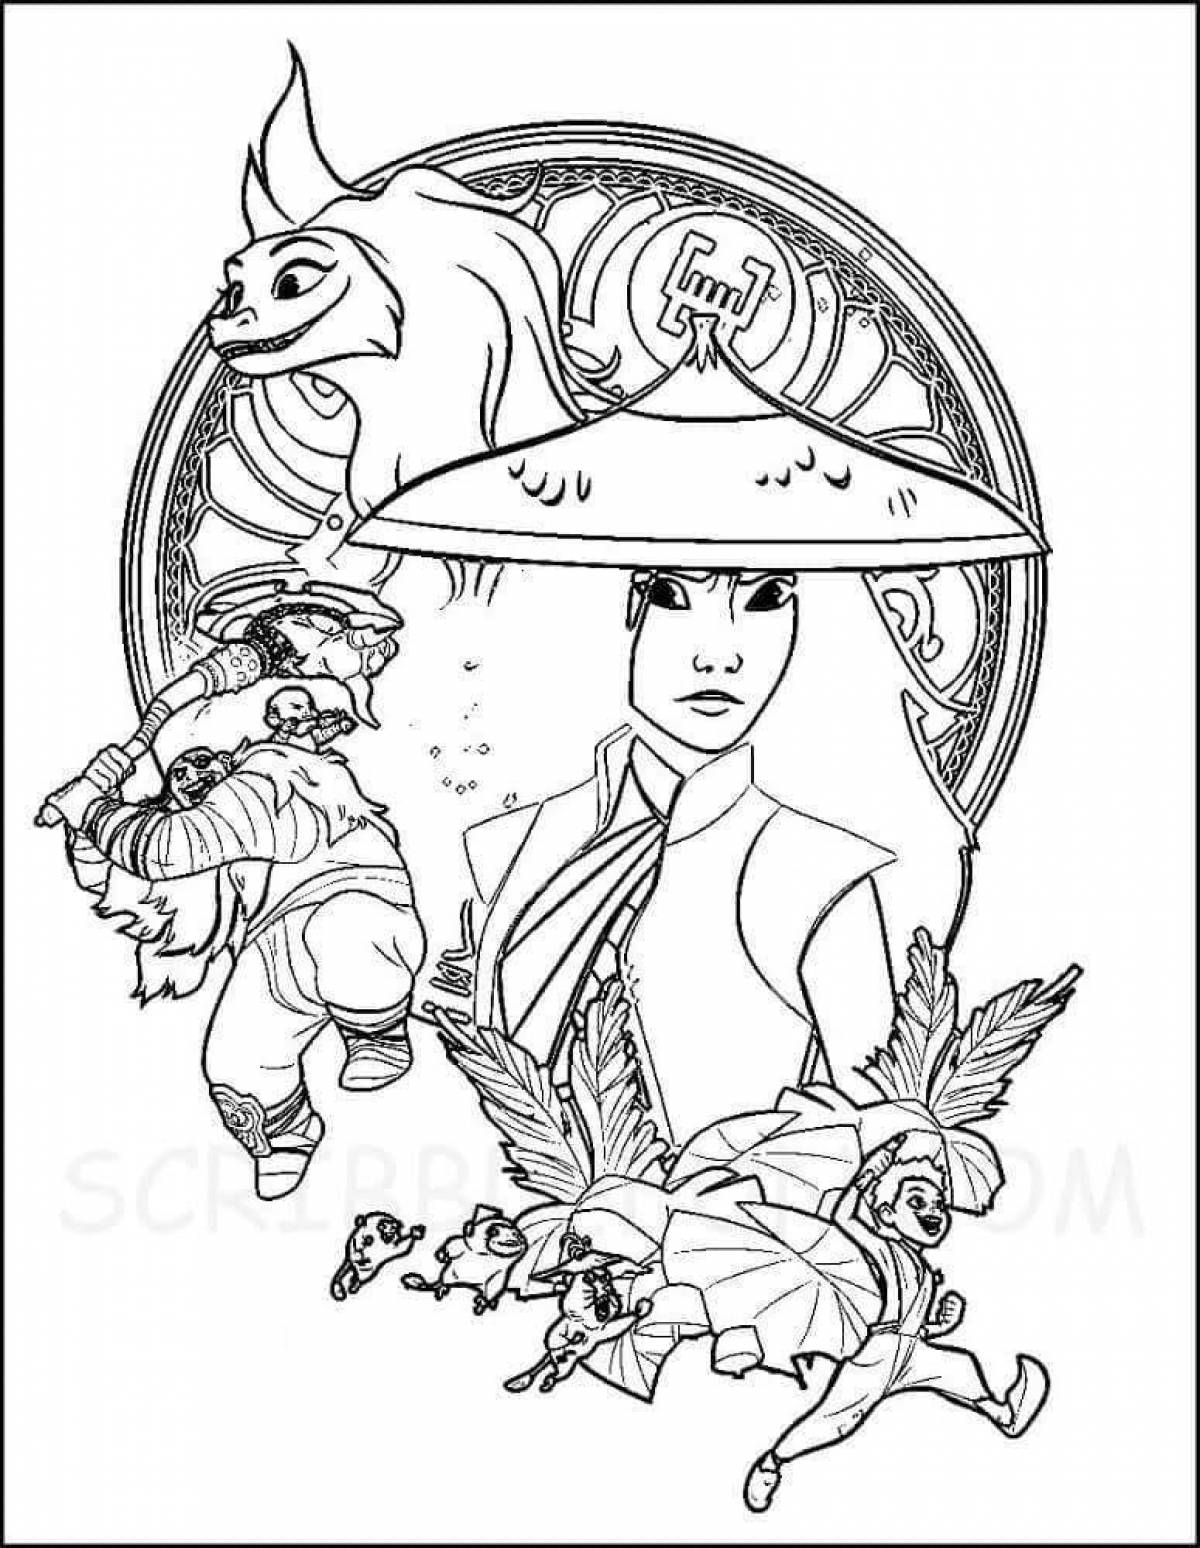 Rampant Paradise and The Last Dragon Coloring Page